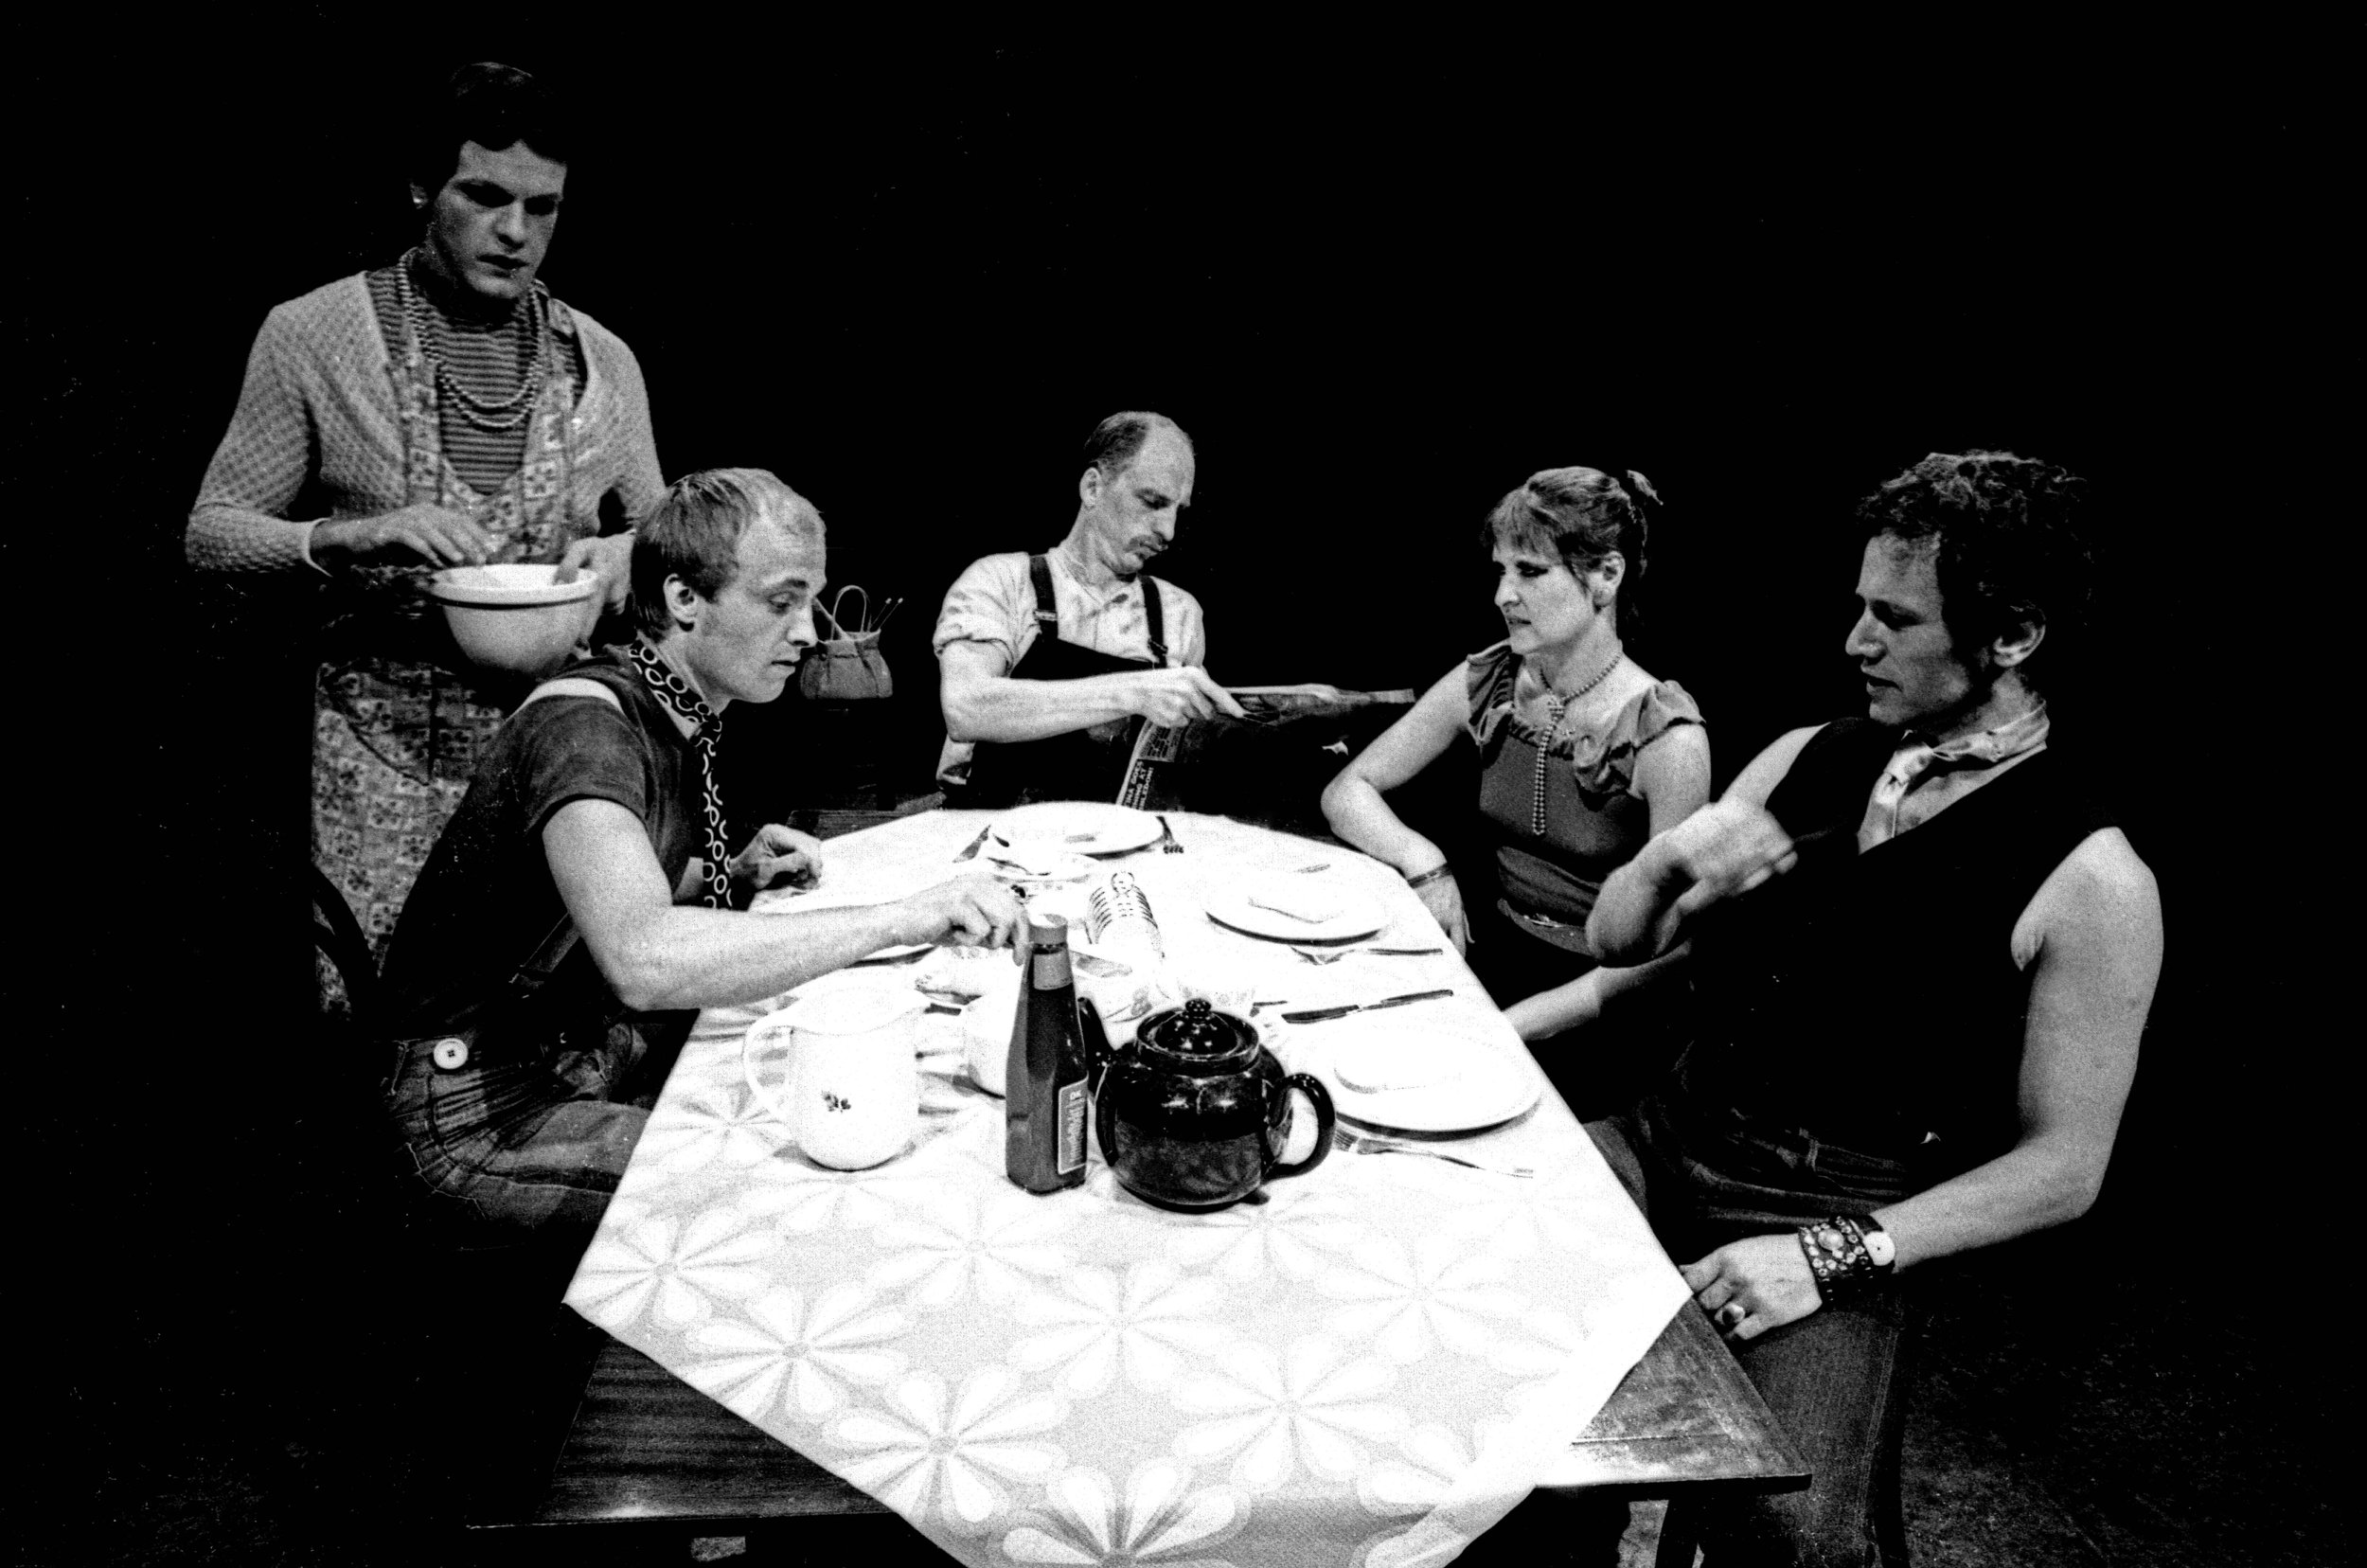 East by Steven Berkoff. A noisy meal at Mike's flat in the East End of London.